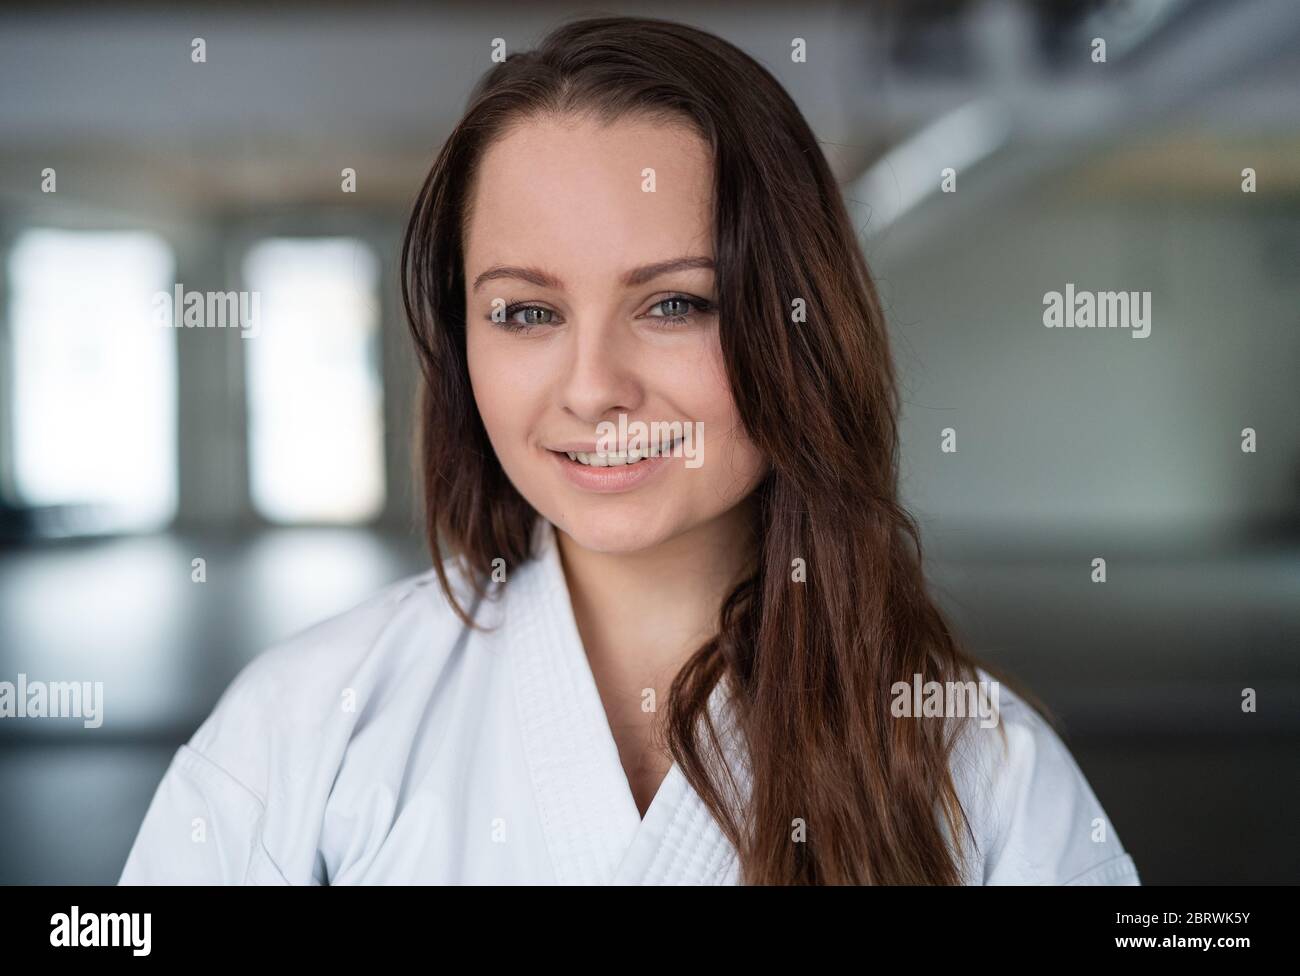 A portrait of young karate woman standing indoors in gym. Stock Photo